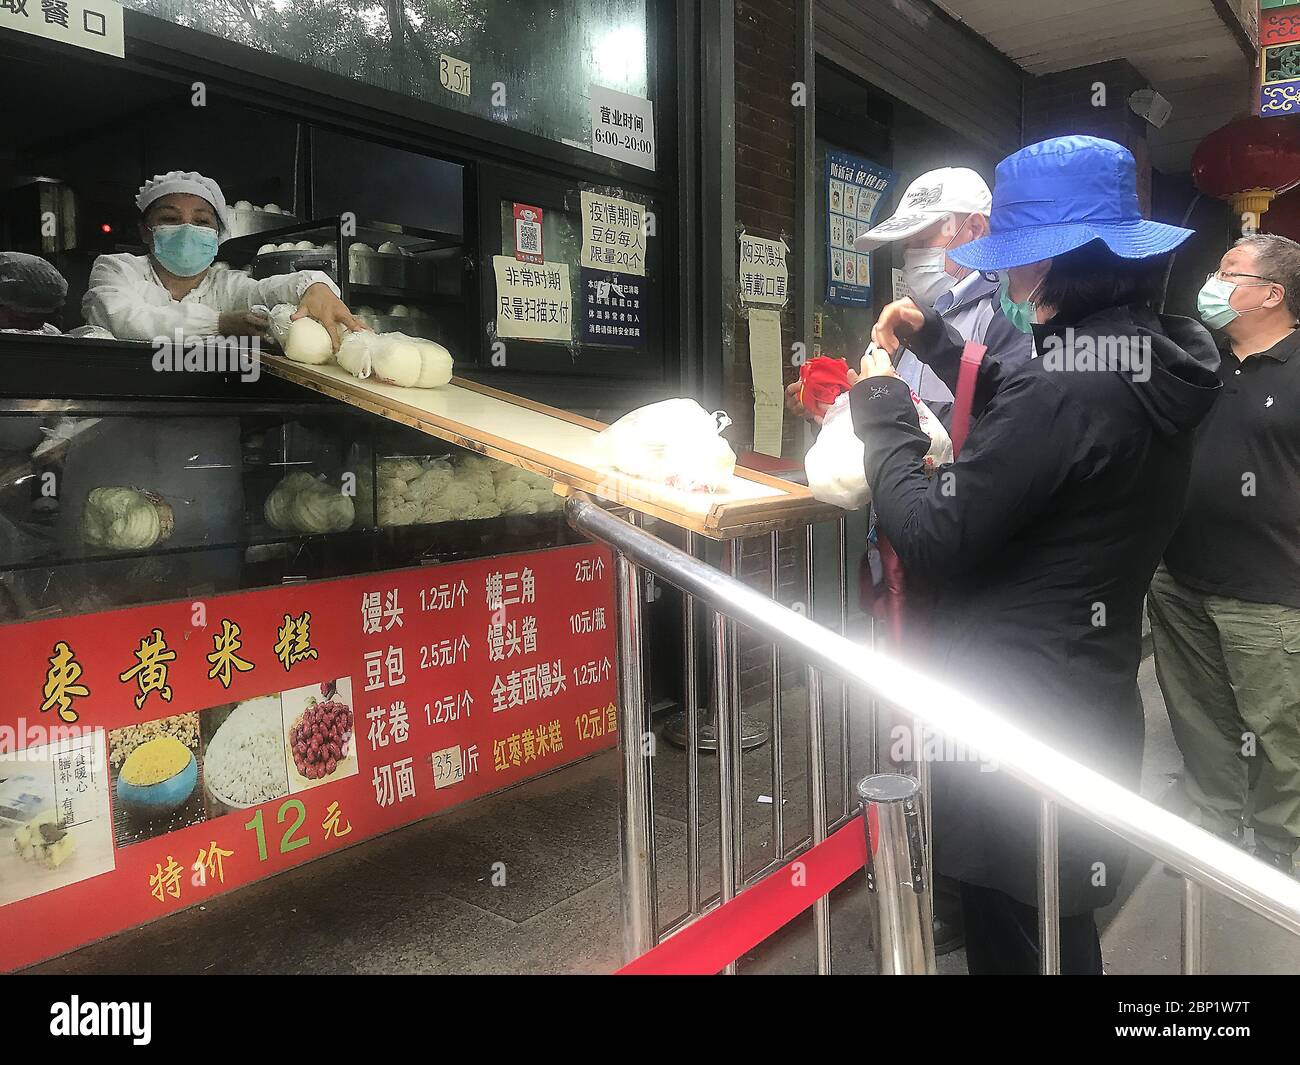 Beijing, China. 17th May, 2020. Chinese order dumplings and buns via an impromptu 'bridge' as they practice 'social distancing' and continue wearing protective face masks outside in downtown as the coronavirus pandemic threat continues in Beijing on Sunday, May 17, 2020. Wuhan, a city of 11 million, where the Covid-19 pandemic originated, reported new cases over the weekend, its first new infections in over a month. China is aggressively investigating the new cluster, announcing a plan to test the entire city in 10 days. Photo by Stephen Shaver/UPI Credit: UPI/Alamy Live News Stock Photo